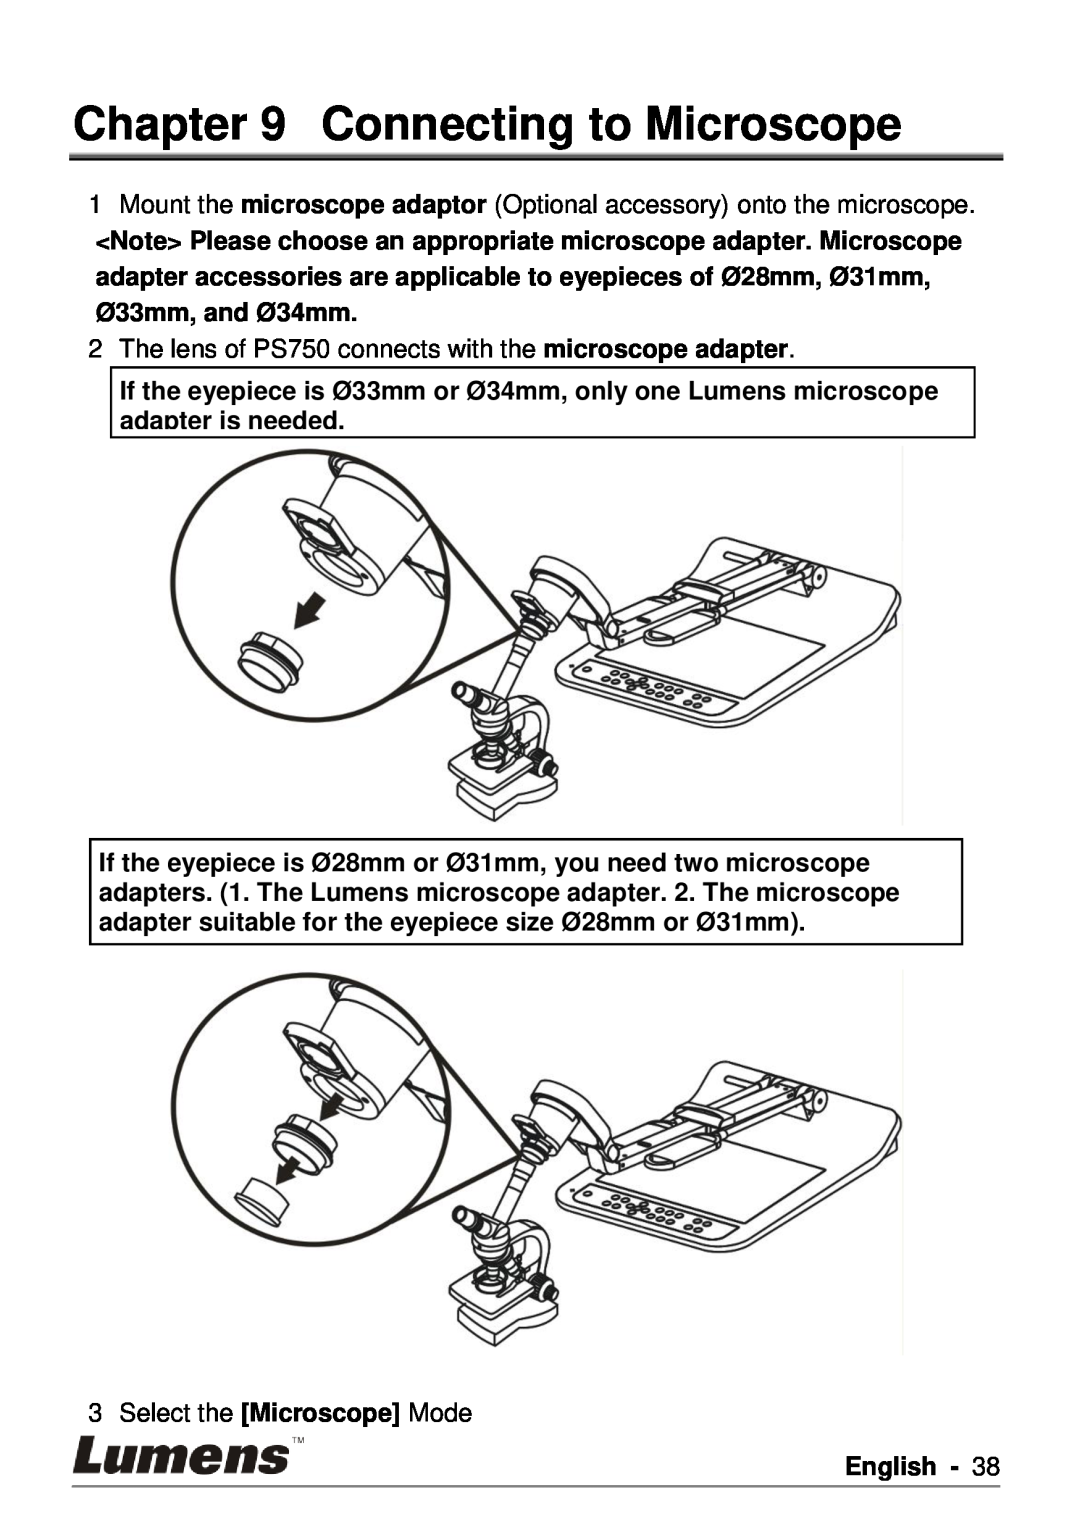 Lumens Technology PS750 user manual Connecting to Microscope, Ø 33mm, and Ø 34mm, Select the Microscope Mode, English 